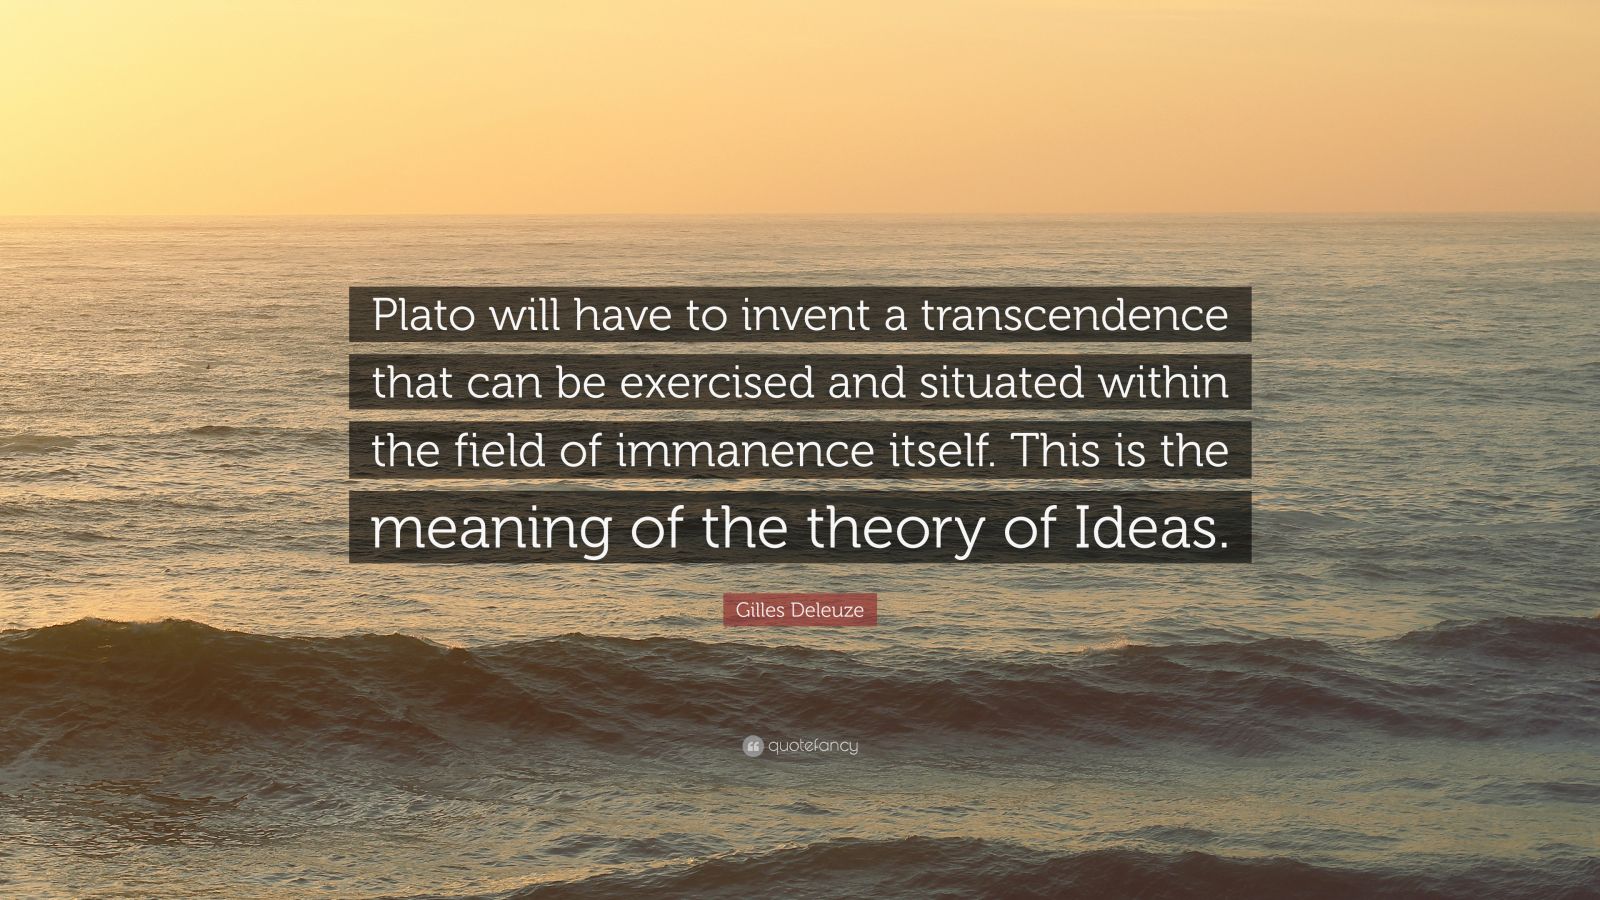 Gilles Deleuze Quote: “Plato will have to invent a transcendence that ...